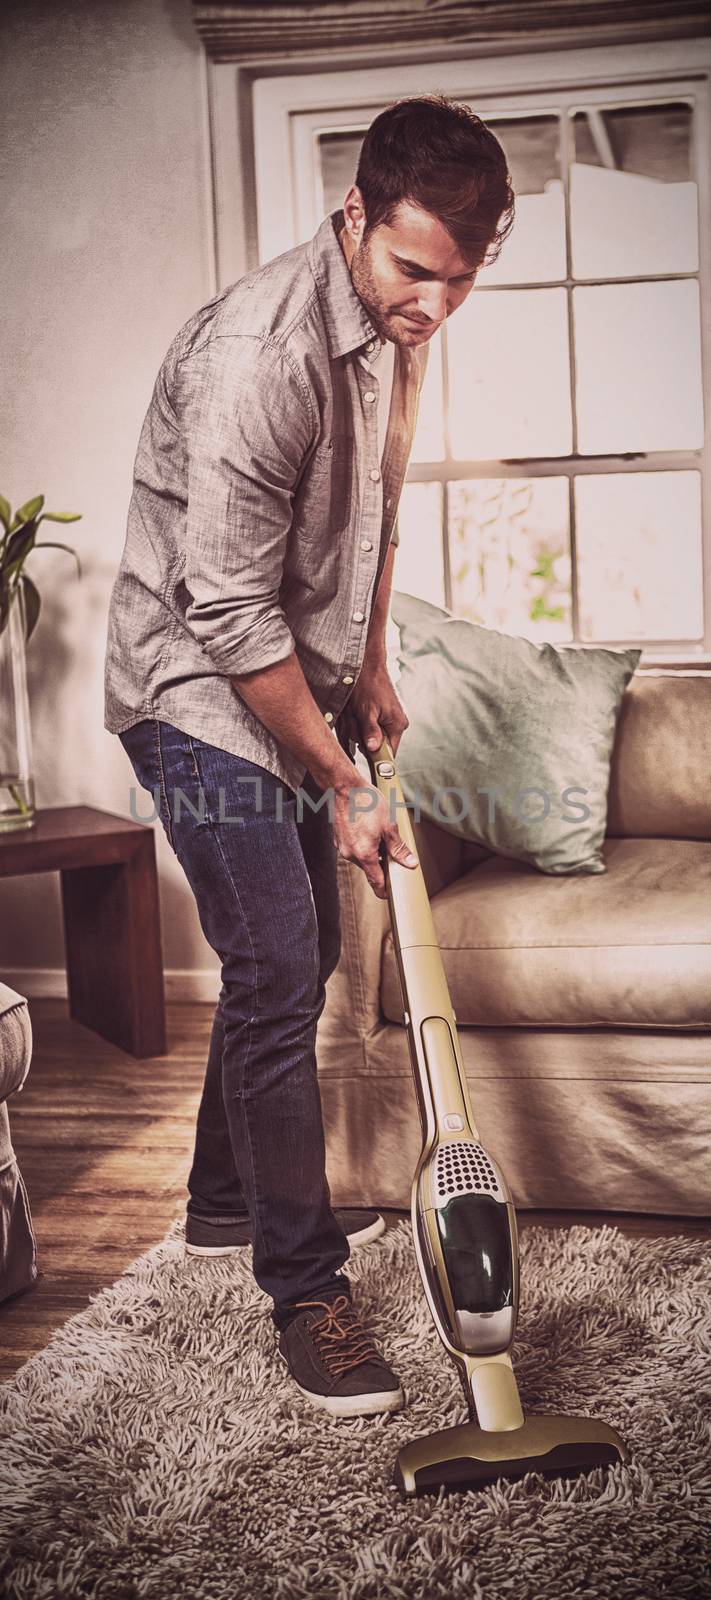 Man cleaning a carpet with a vacuum cleaner at home